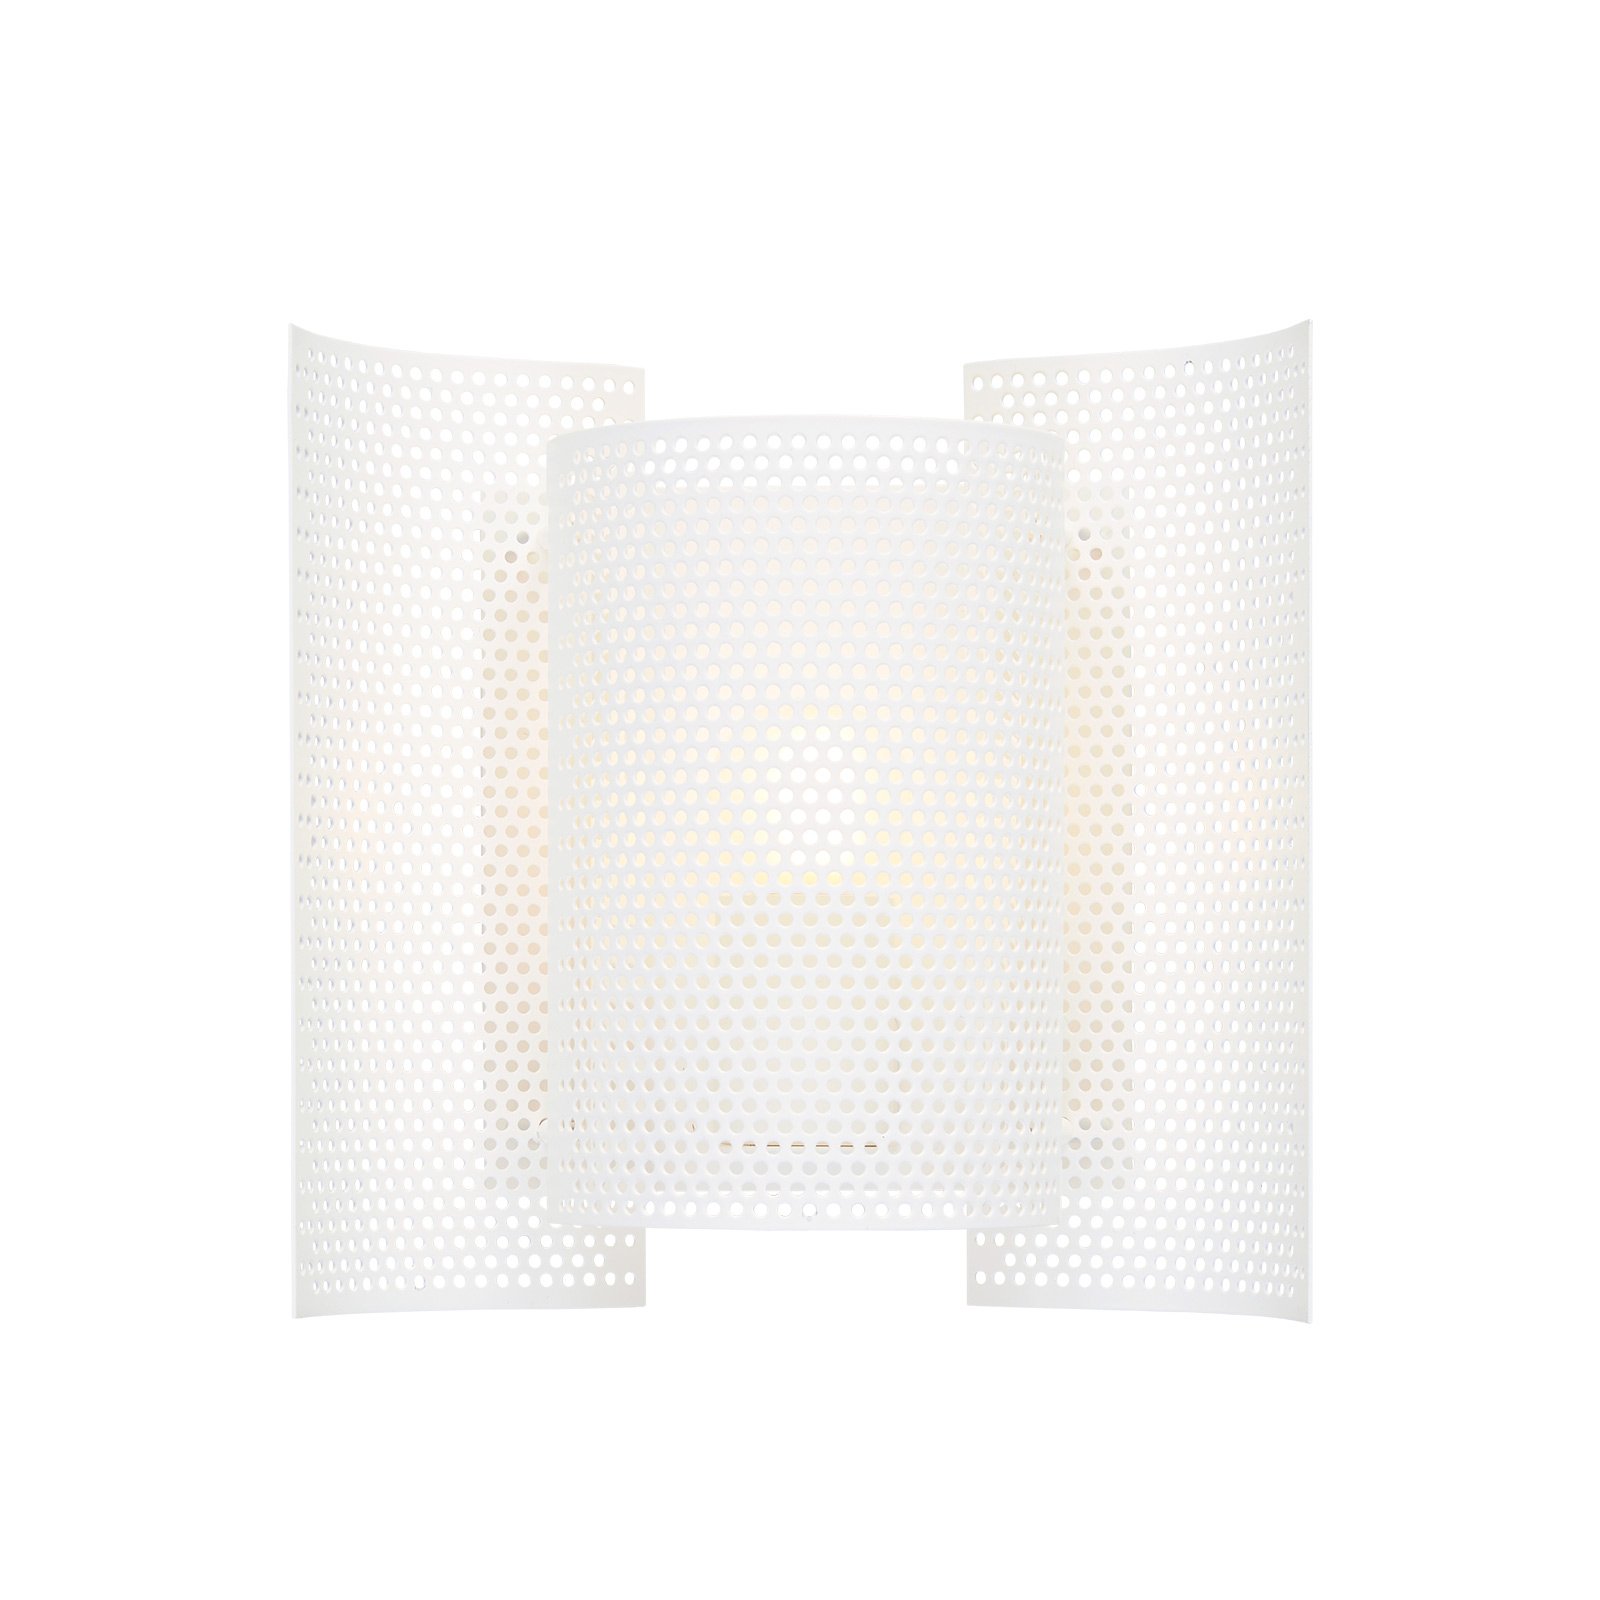 Northern Butterfly perforated wall light, white